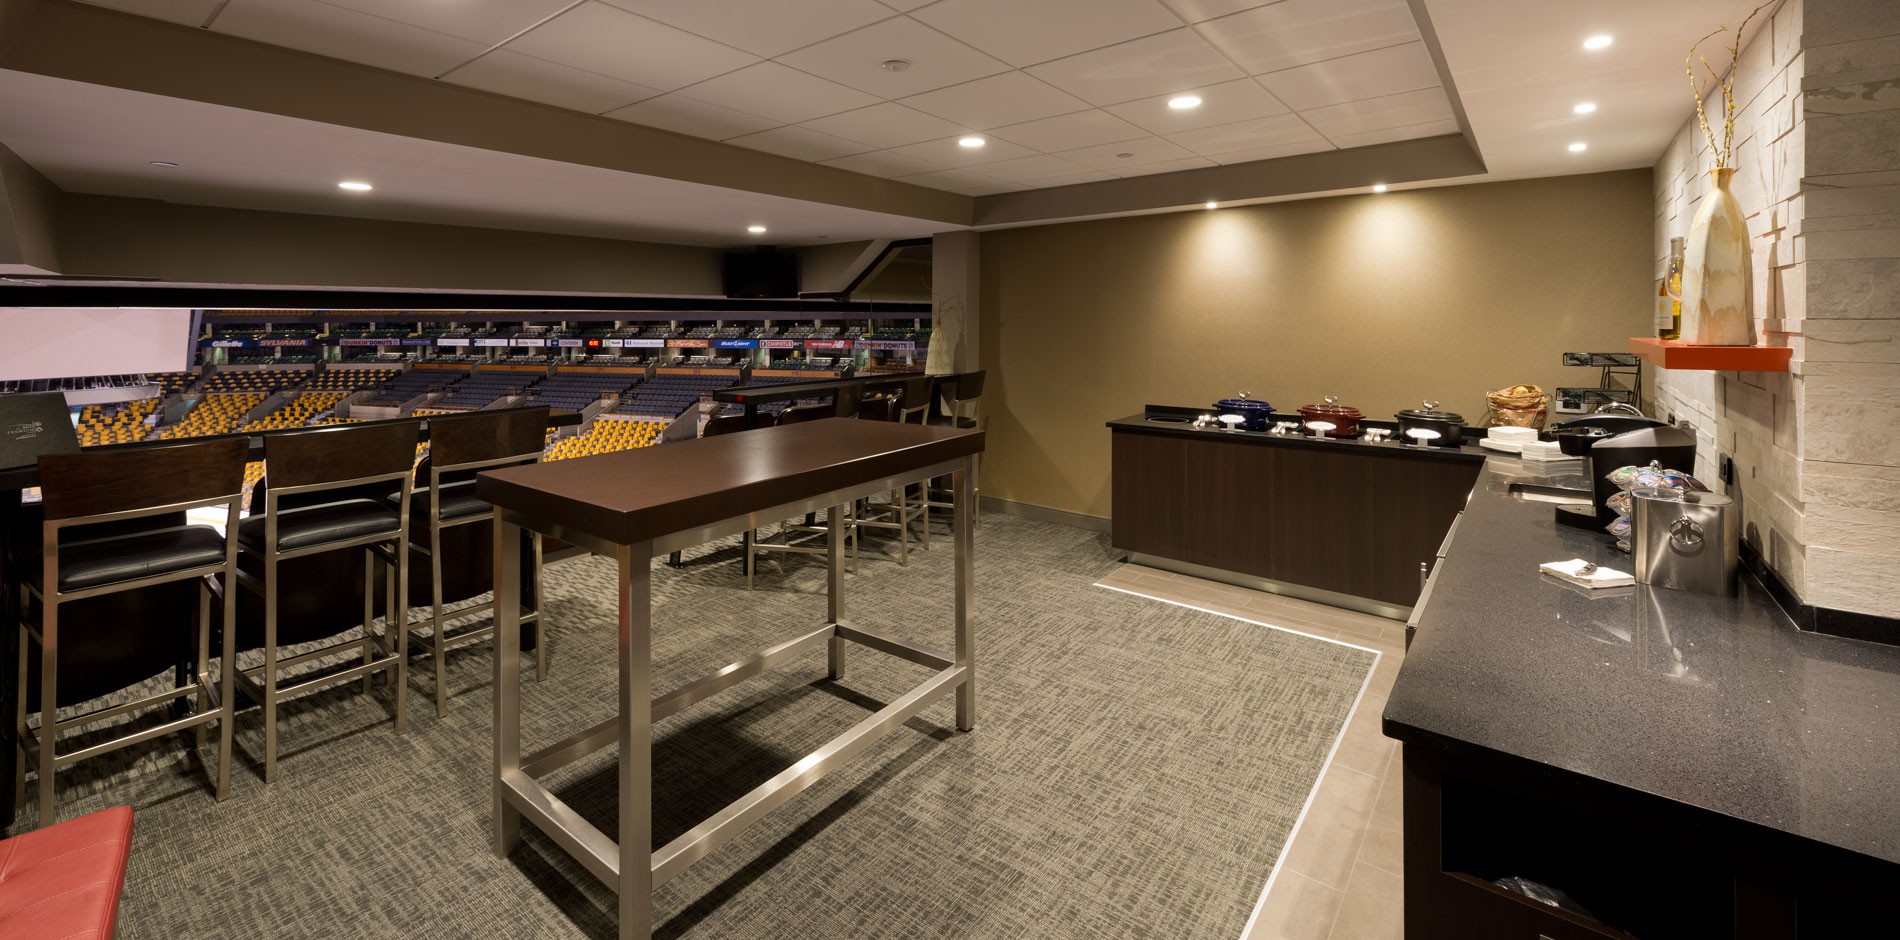 Luxury Suites at TD Garden Renovation & Fit-Out Construction Project